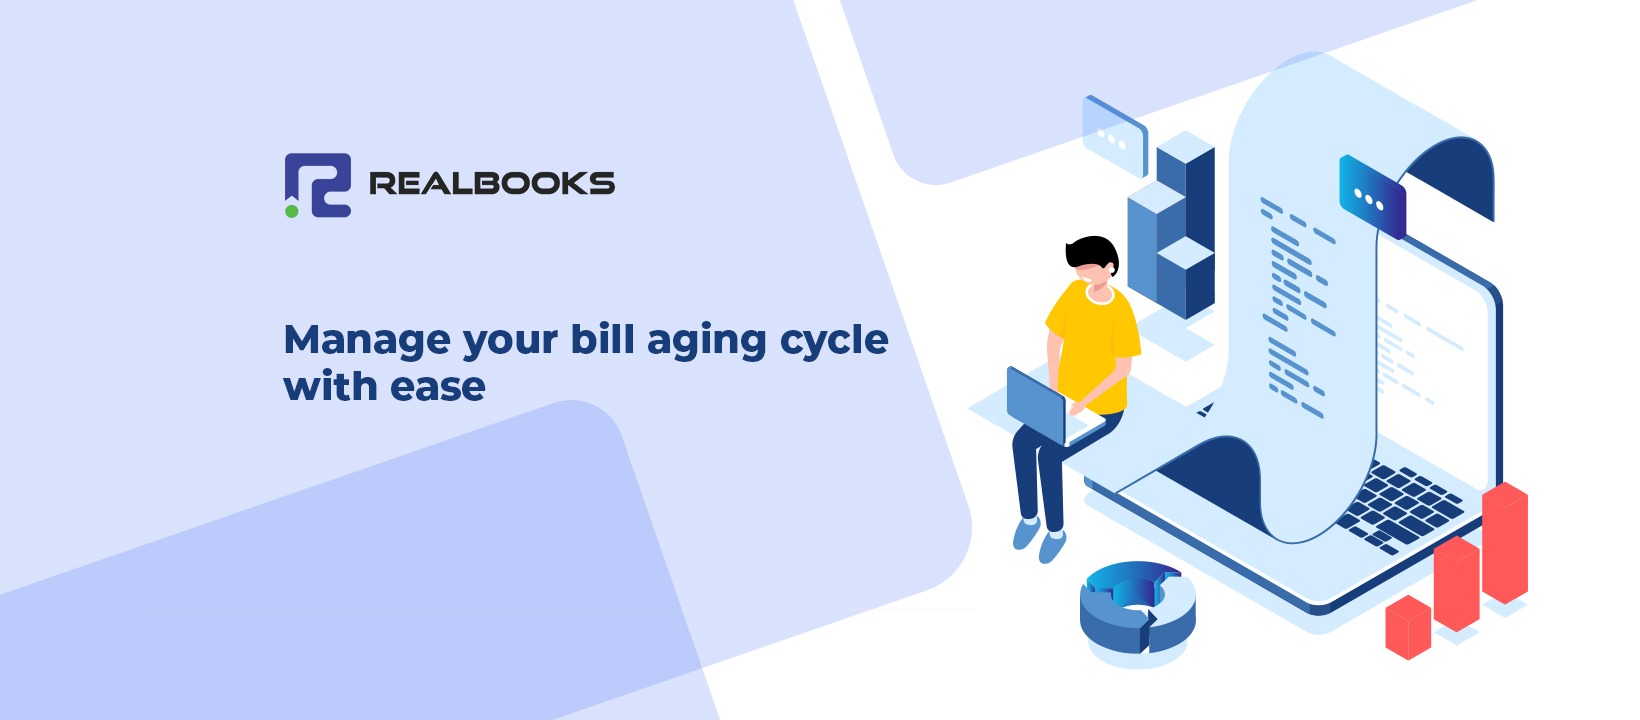 Monitor the health of your business with RealBooks’ Bill Aging Report